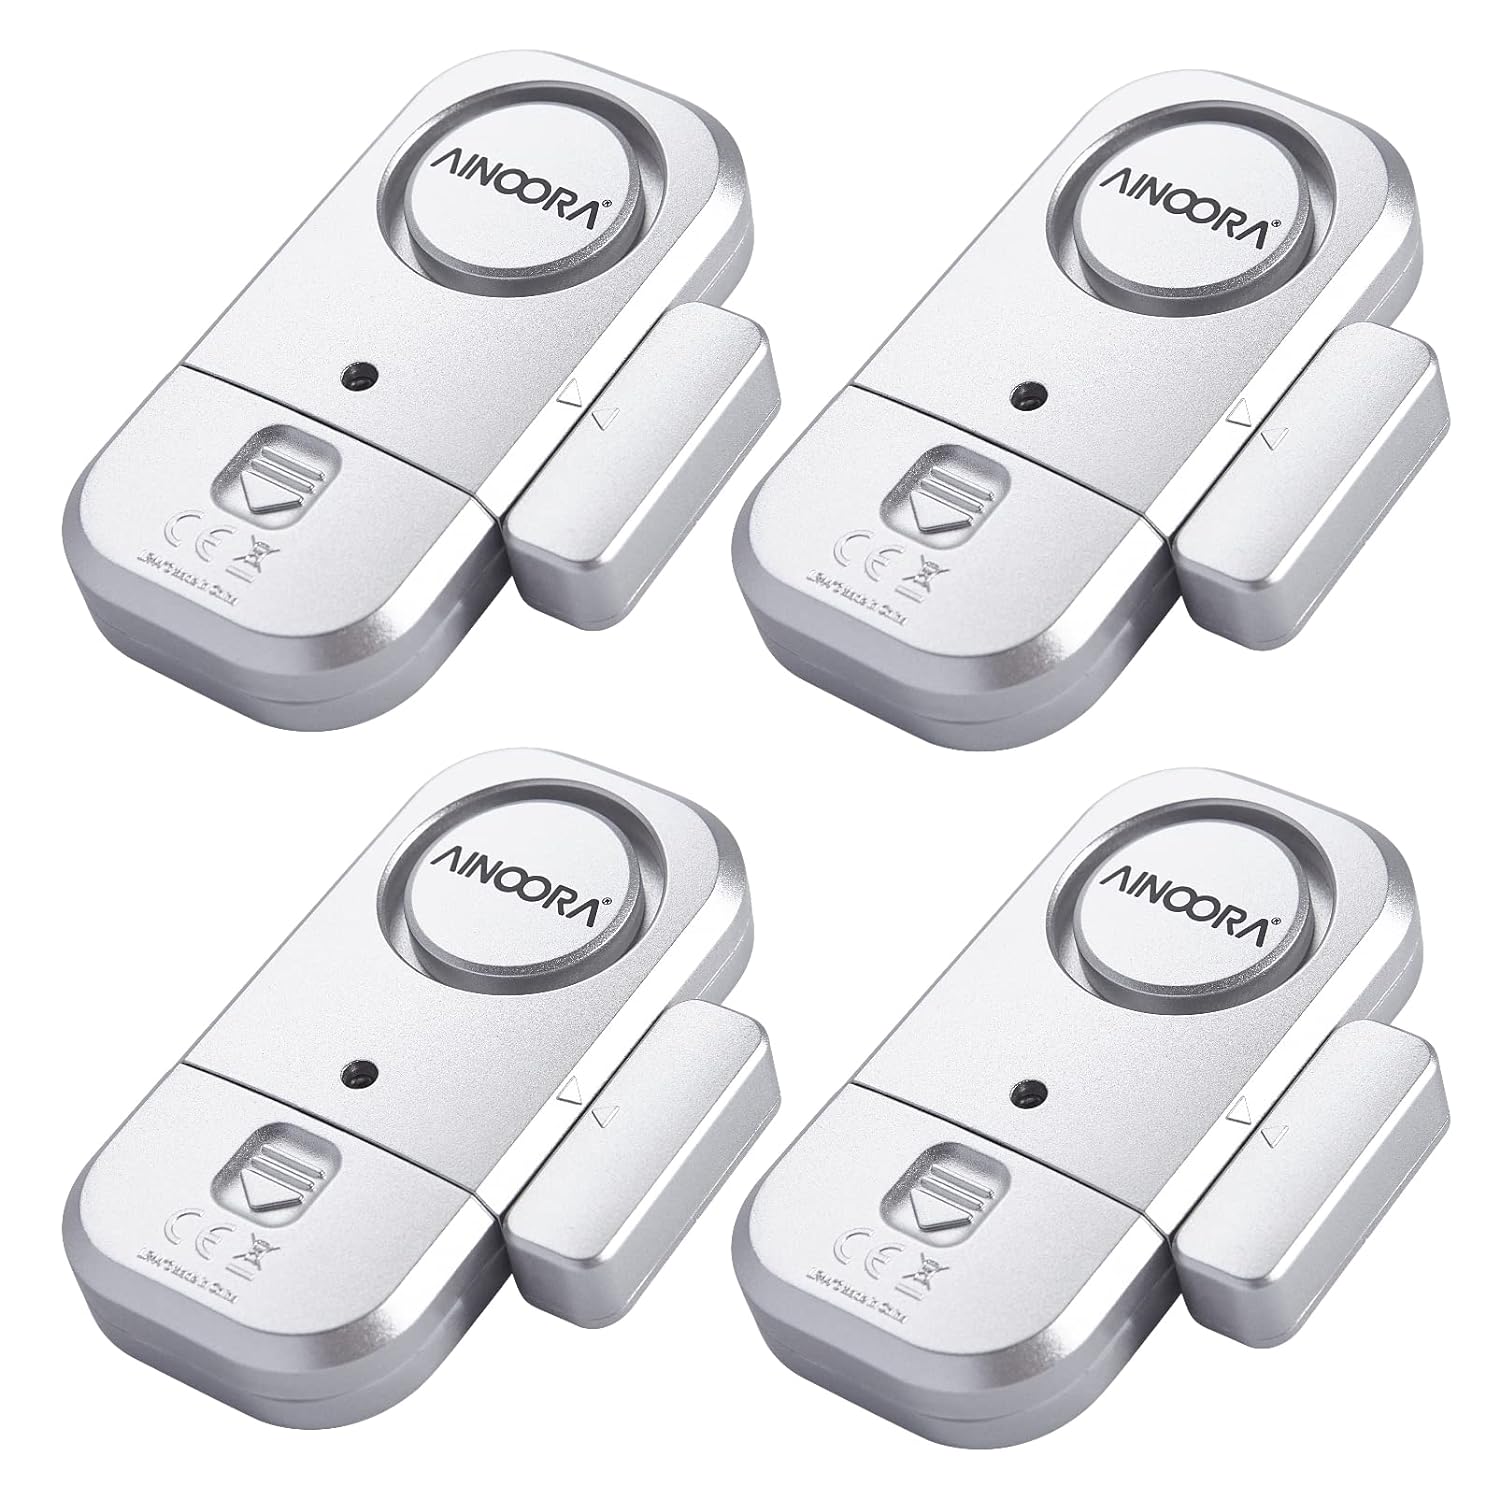 Door Alarms for Kids Safety 4 Pack, AINOORA 120db Window Alarms Magnetic Pool Alarm Open Sensors for Toddlers Dementia Patients Safety for Home Security